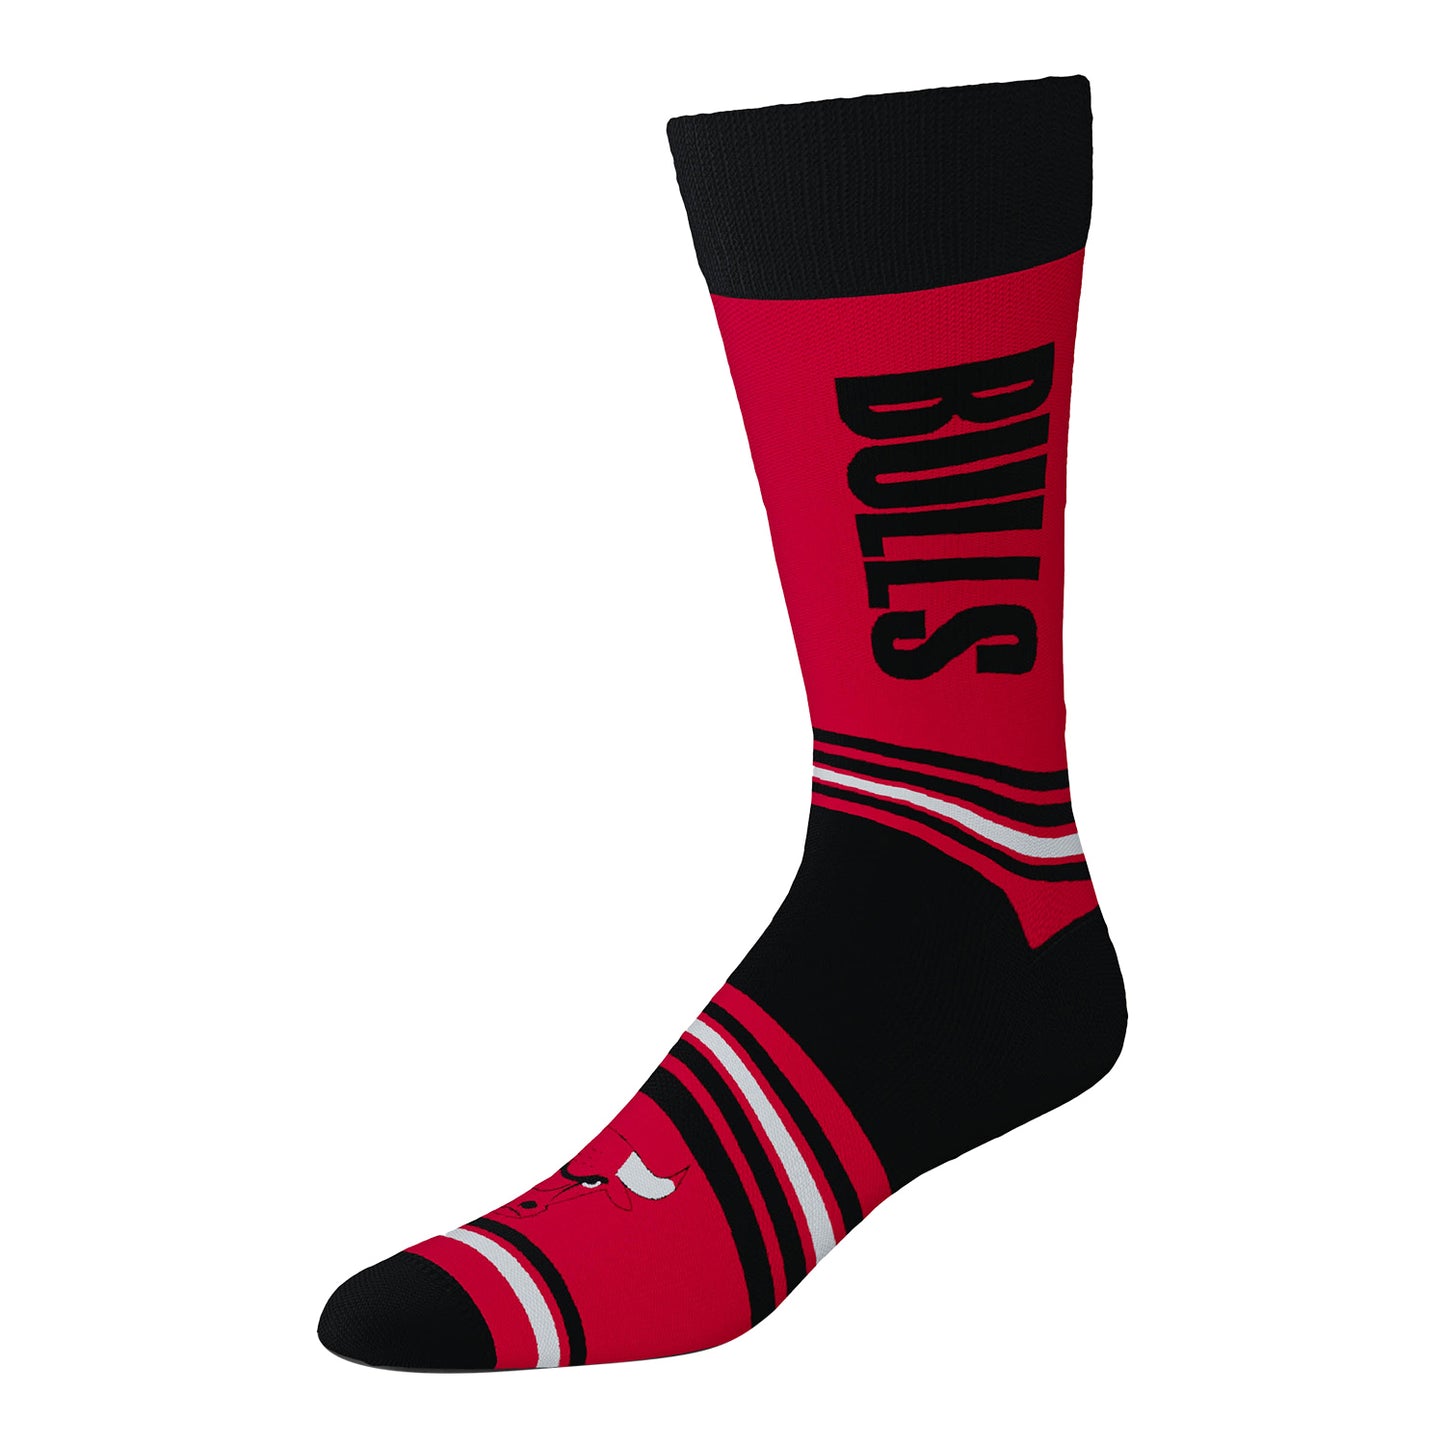 Chicago Bulls Go Team Sock - black and red - front view